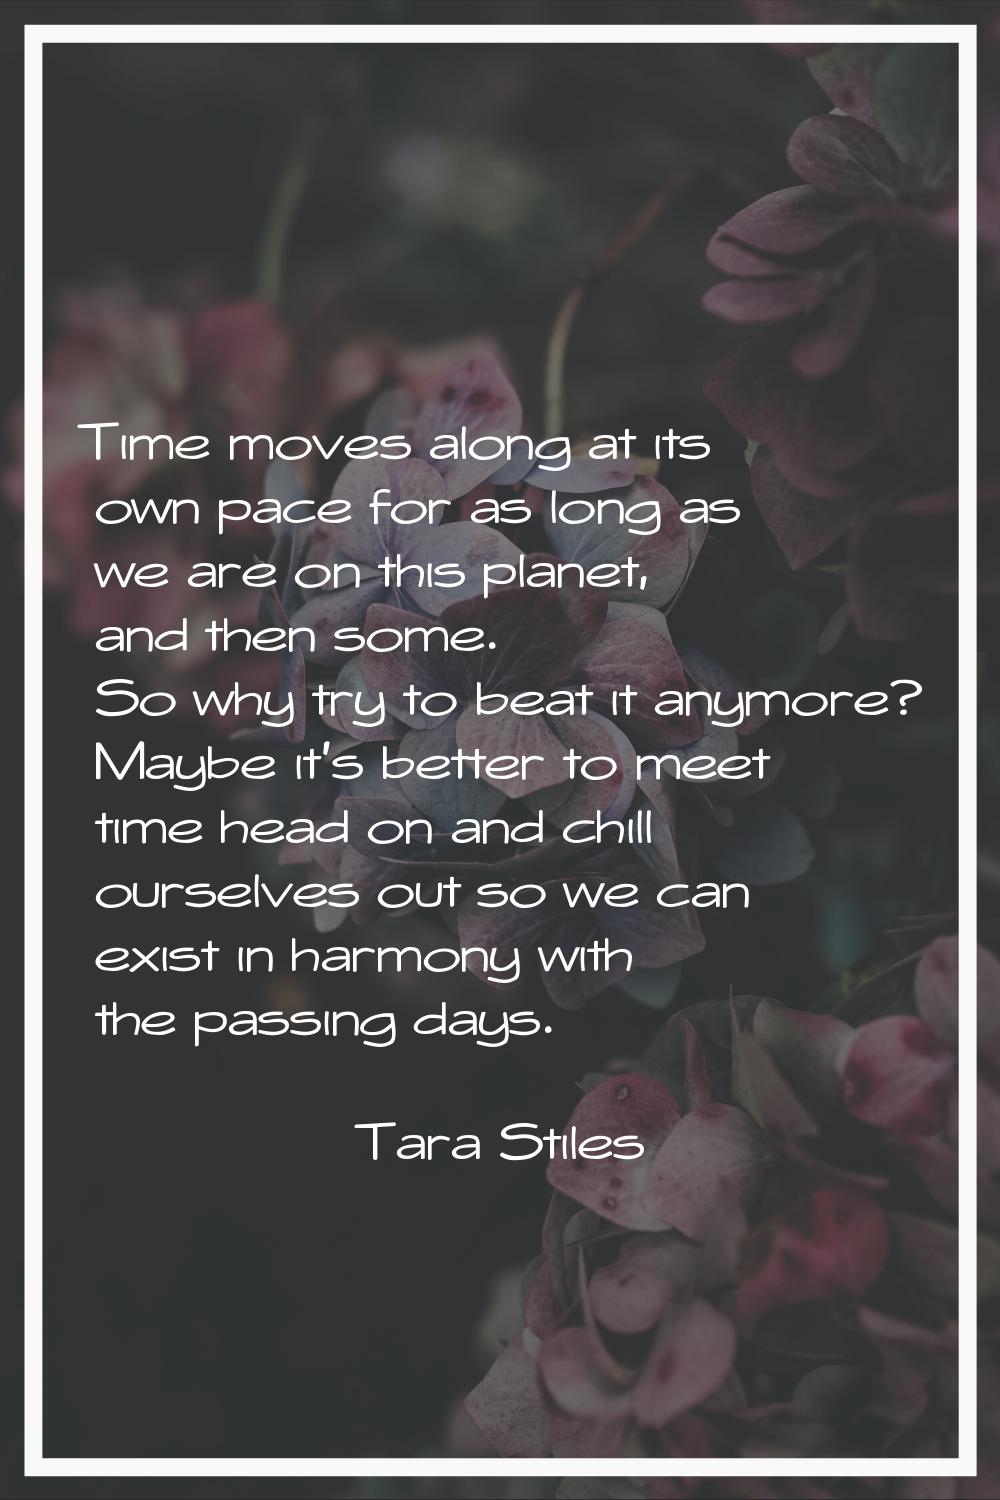 Time moves along at its own pace for as long as we are on this planet, and then some. So why try to